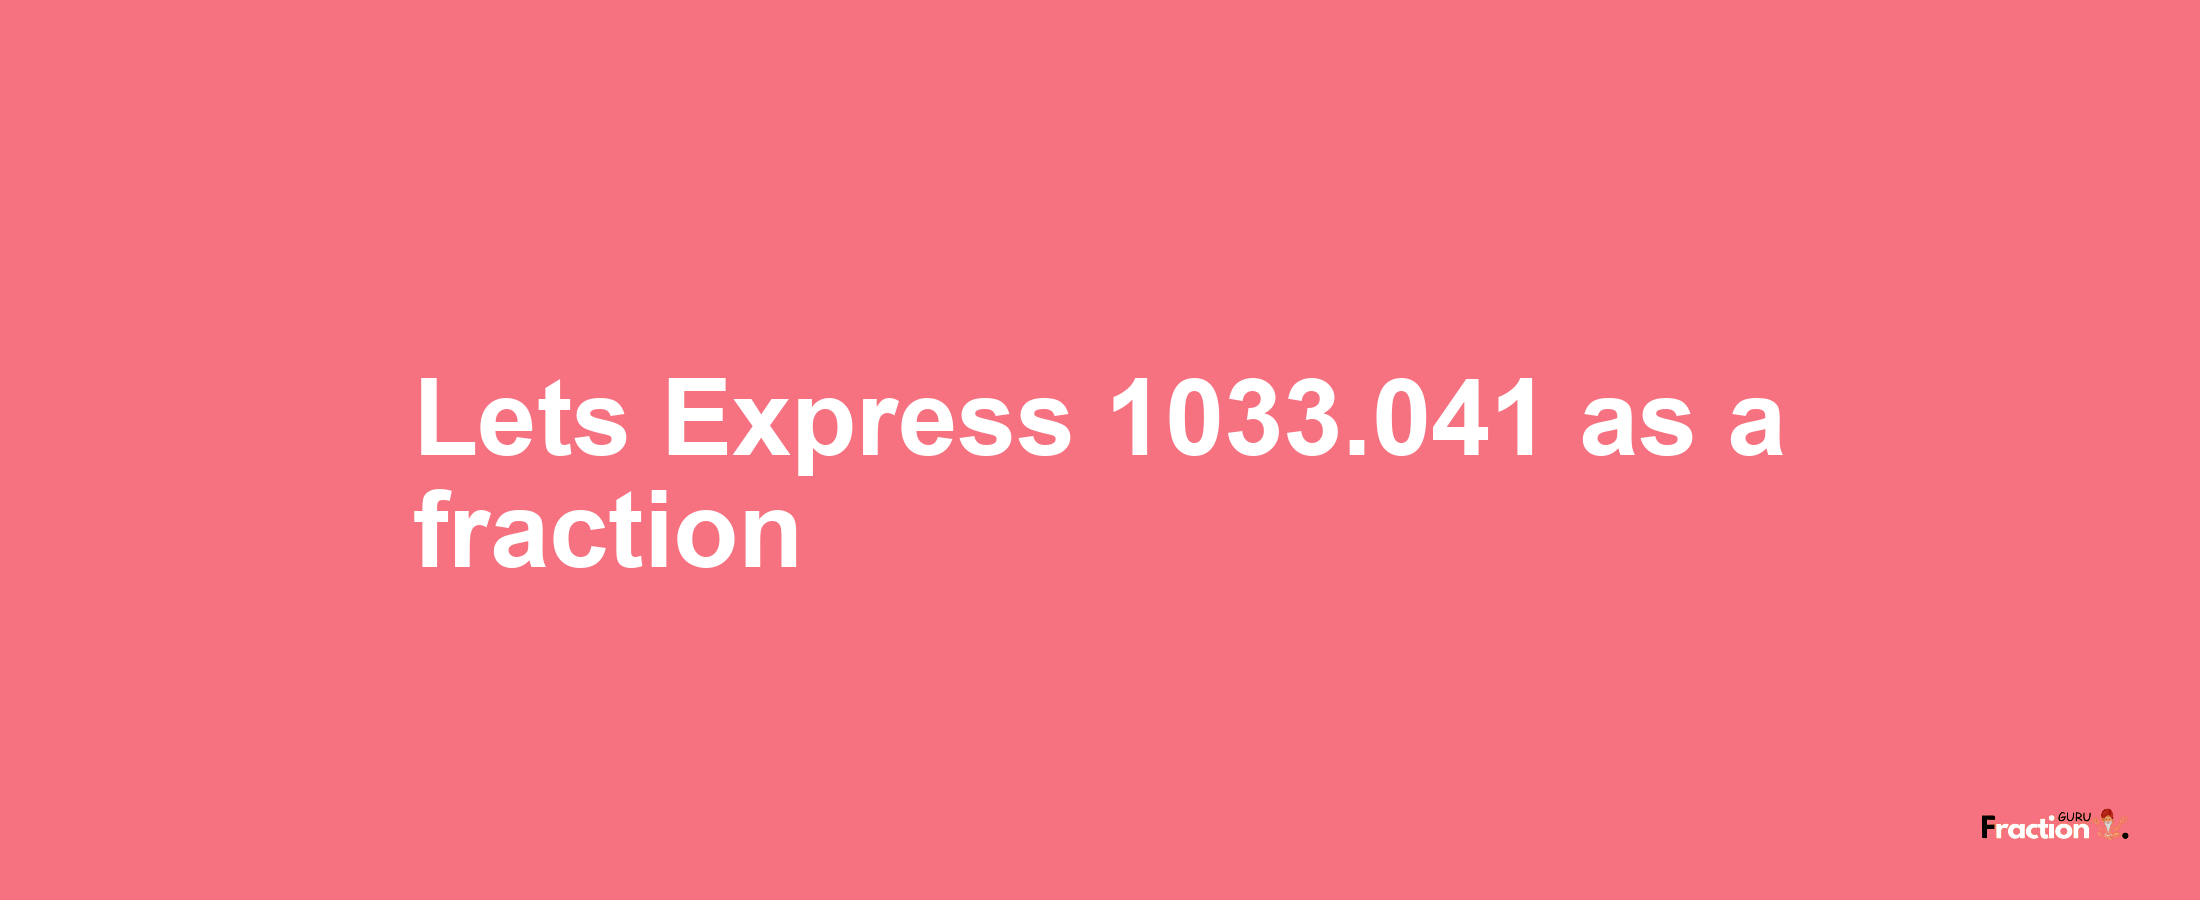 Lets Express 1033.041 as afraction